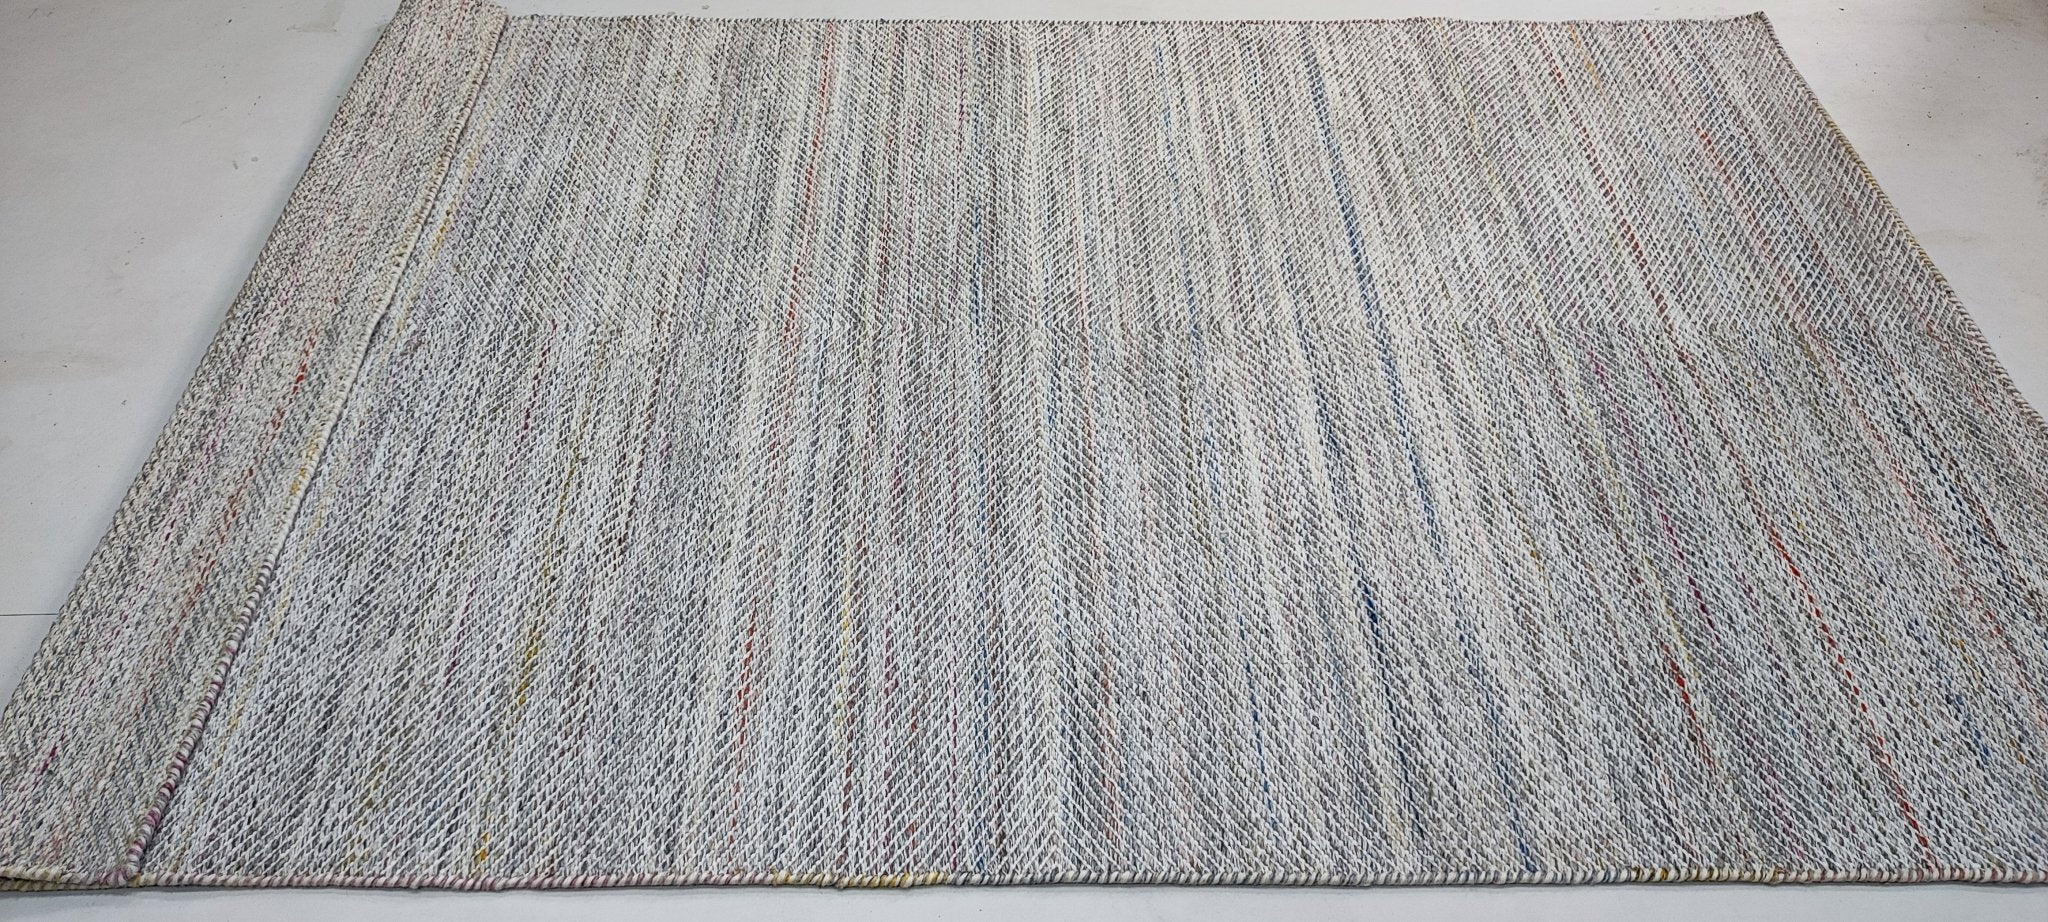 Krewe of Bilge 5x8 Handwoven Silver Textured Durrie | Banana Manor Rug Factory Outlet